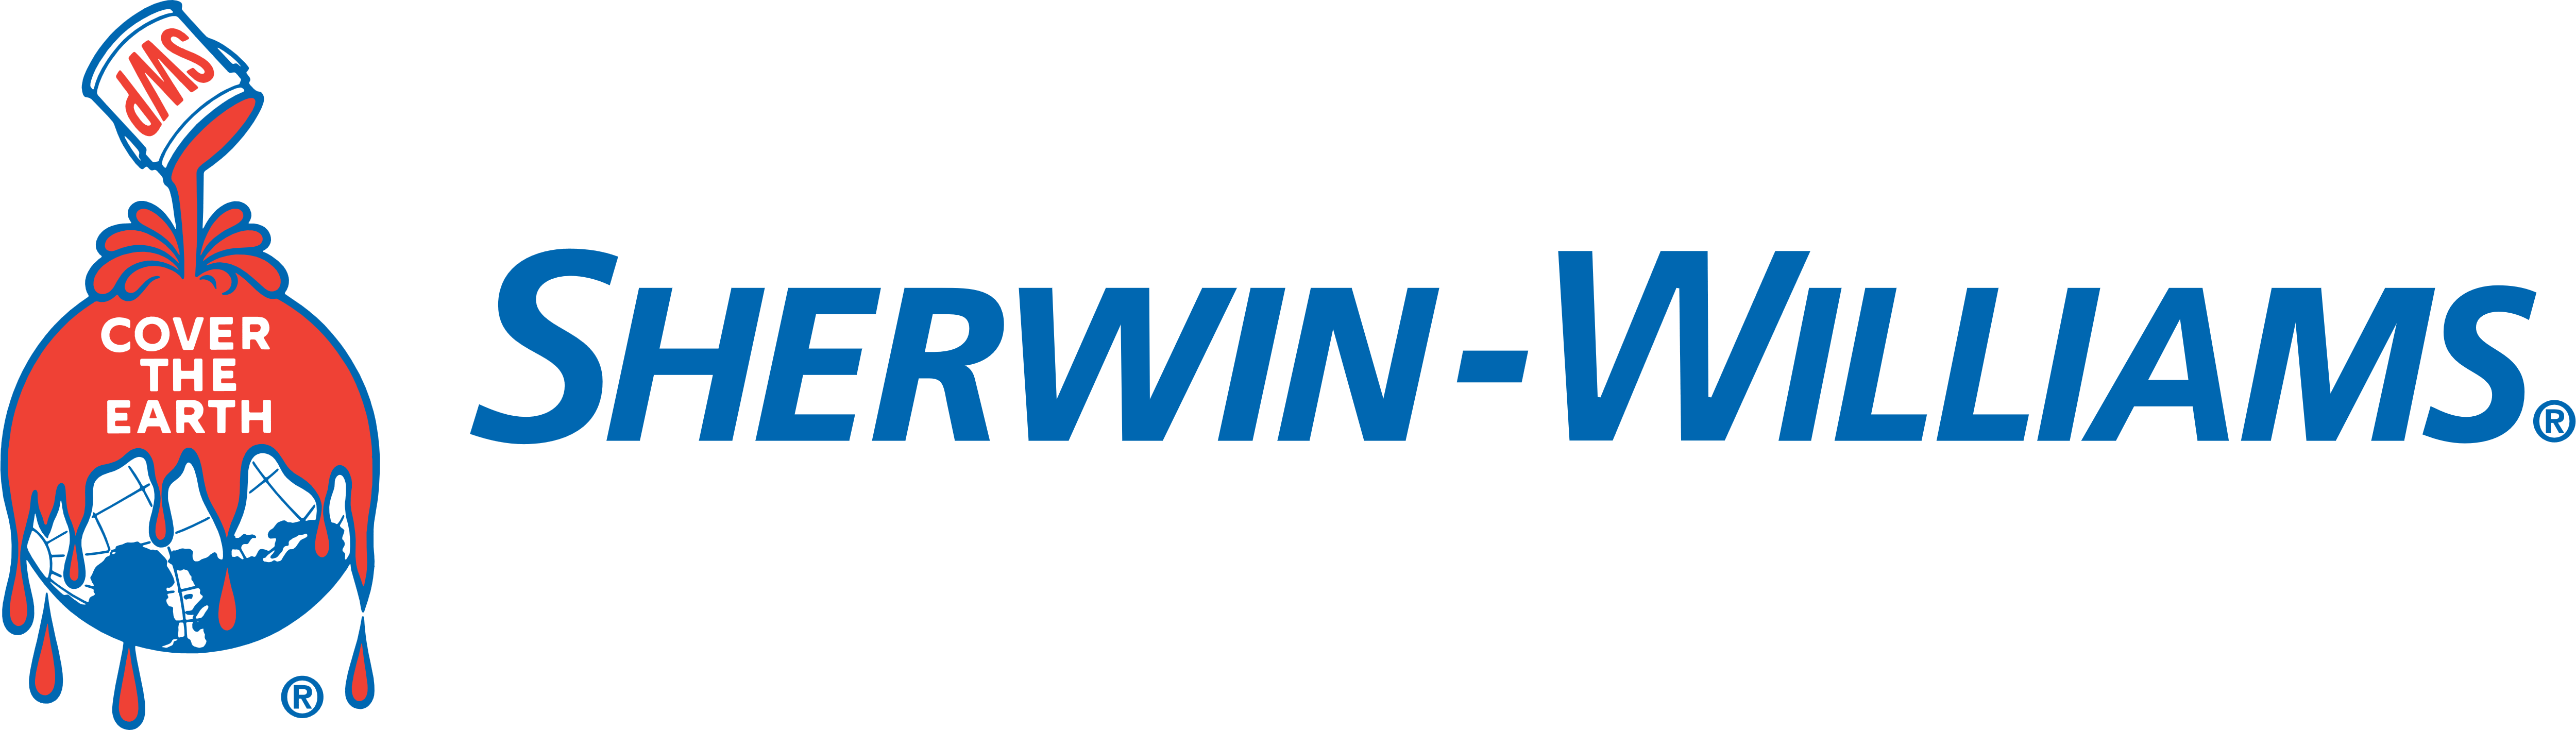 Sherwin Williams painting services Painting Services Sherwin Williams logo wordmark